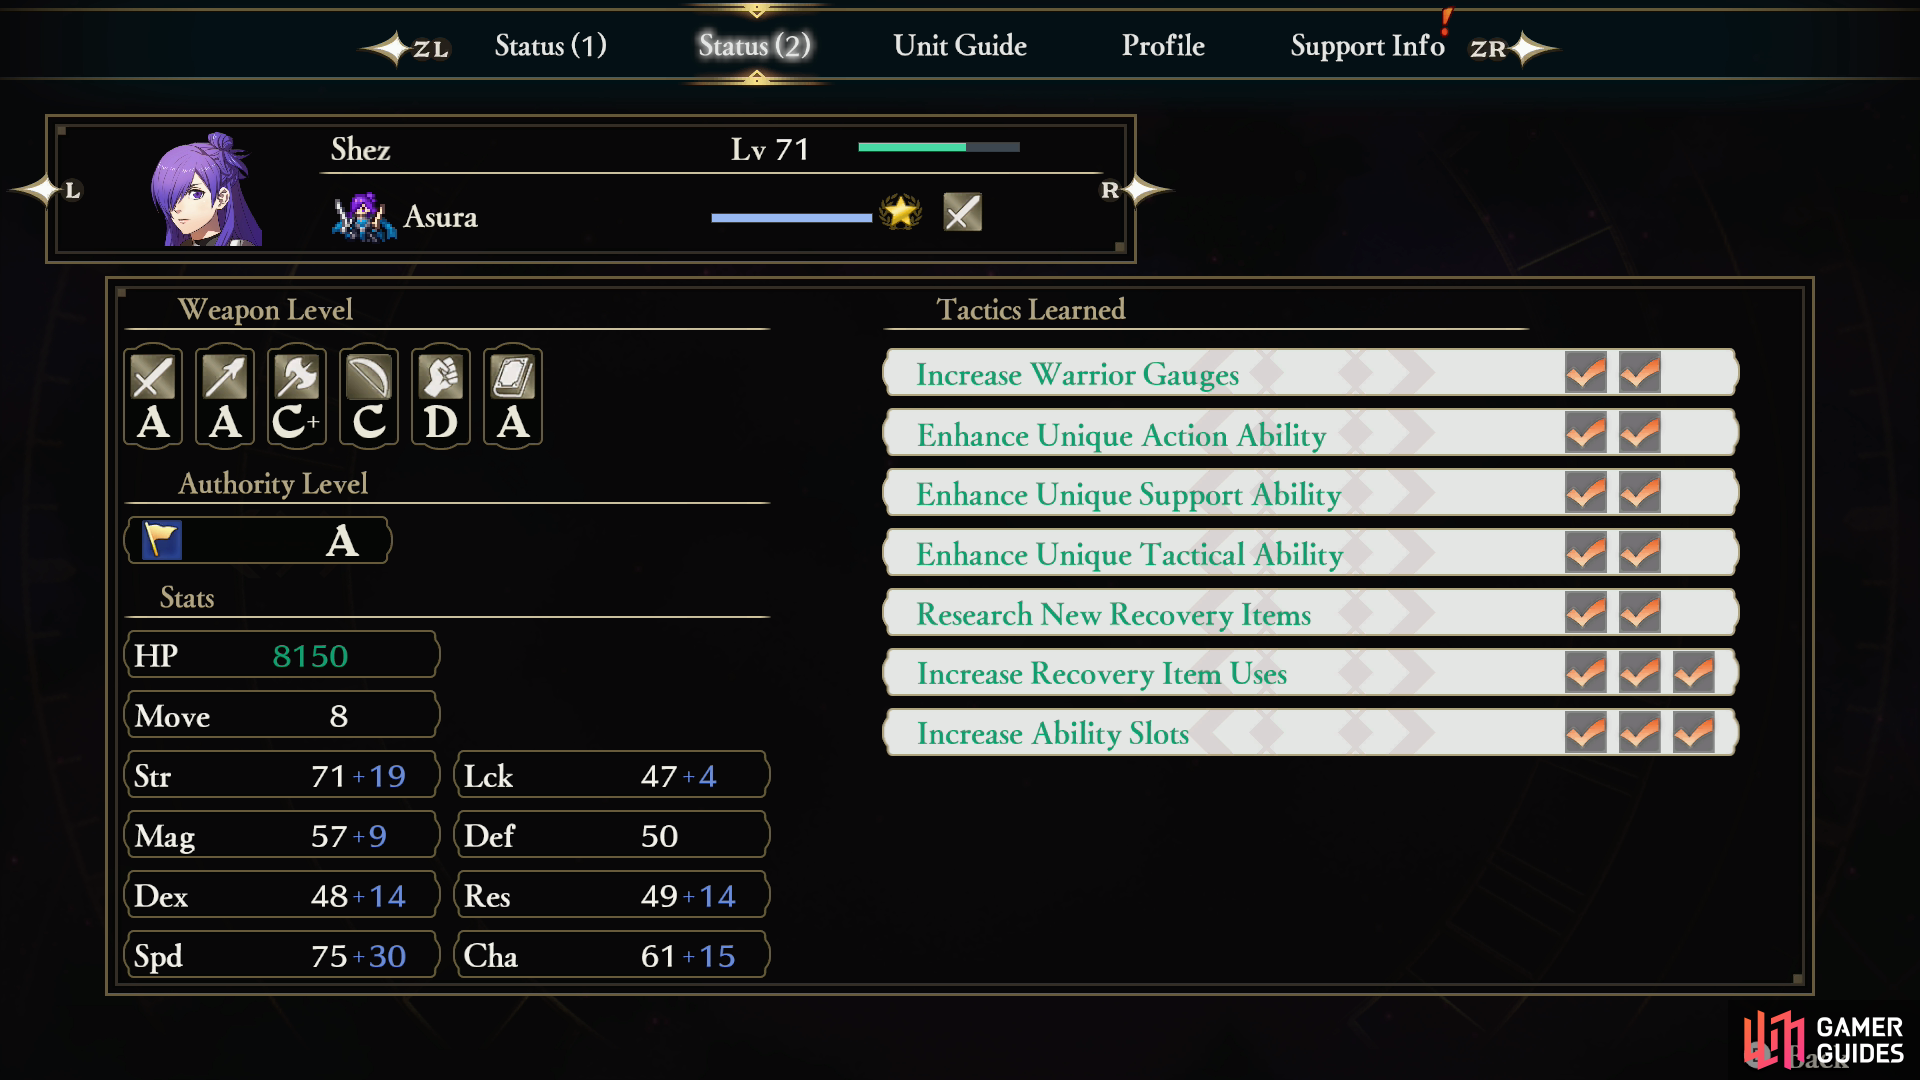 You can check a units Adjutant stat boosts during battle, which can become quite significant.